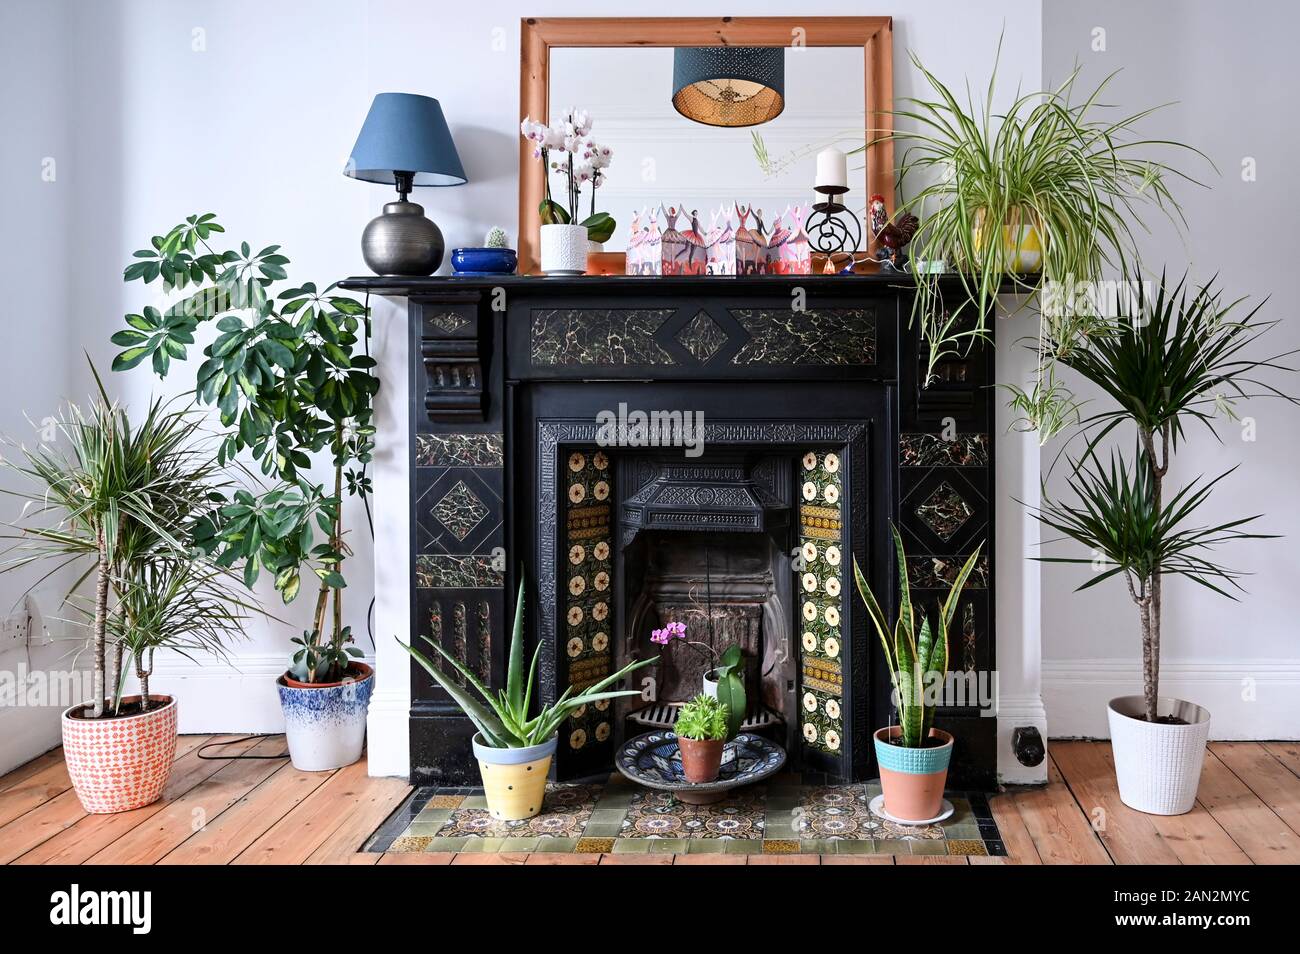 Authentic domestic interior with Victorian tiled fireplace surrounded by a selection of healthy green houseplants in pots. Stock Photo